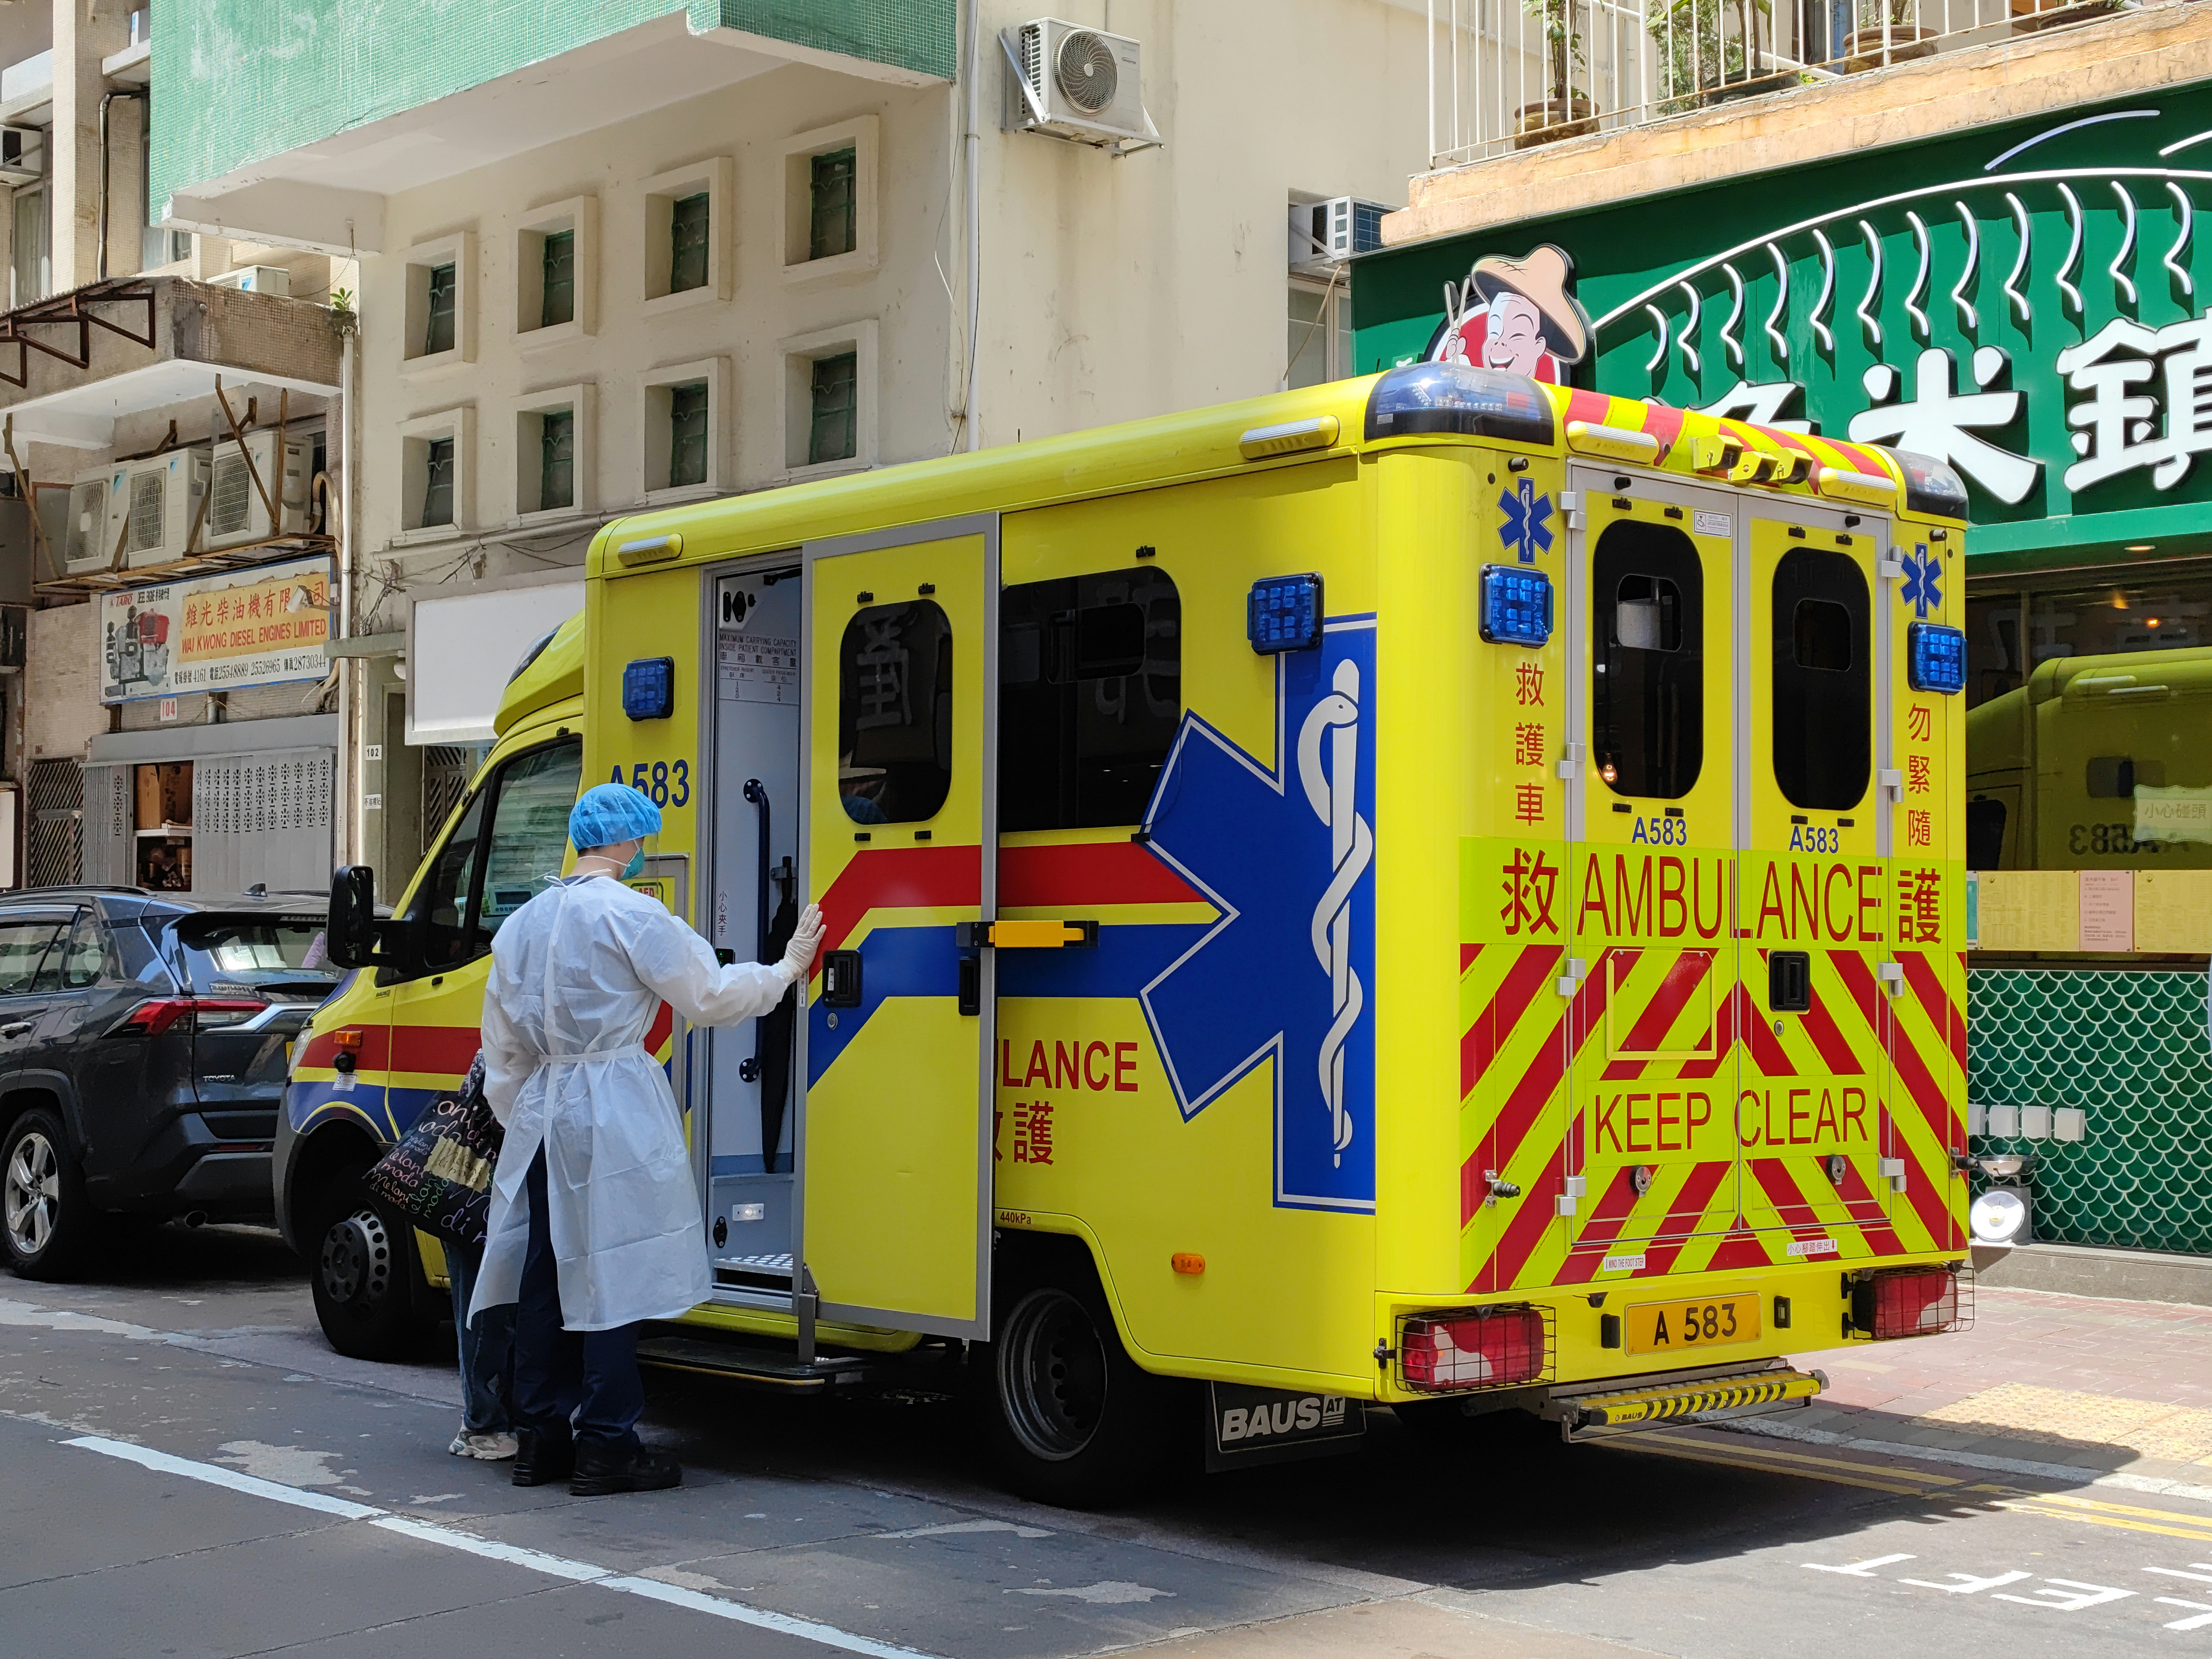 An ambulanceman in service in Hong Kong. He was wearing a full set of personal protective equipment as the Covid 19 pandemic is prevailing in Hong Kong.